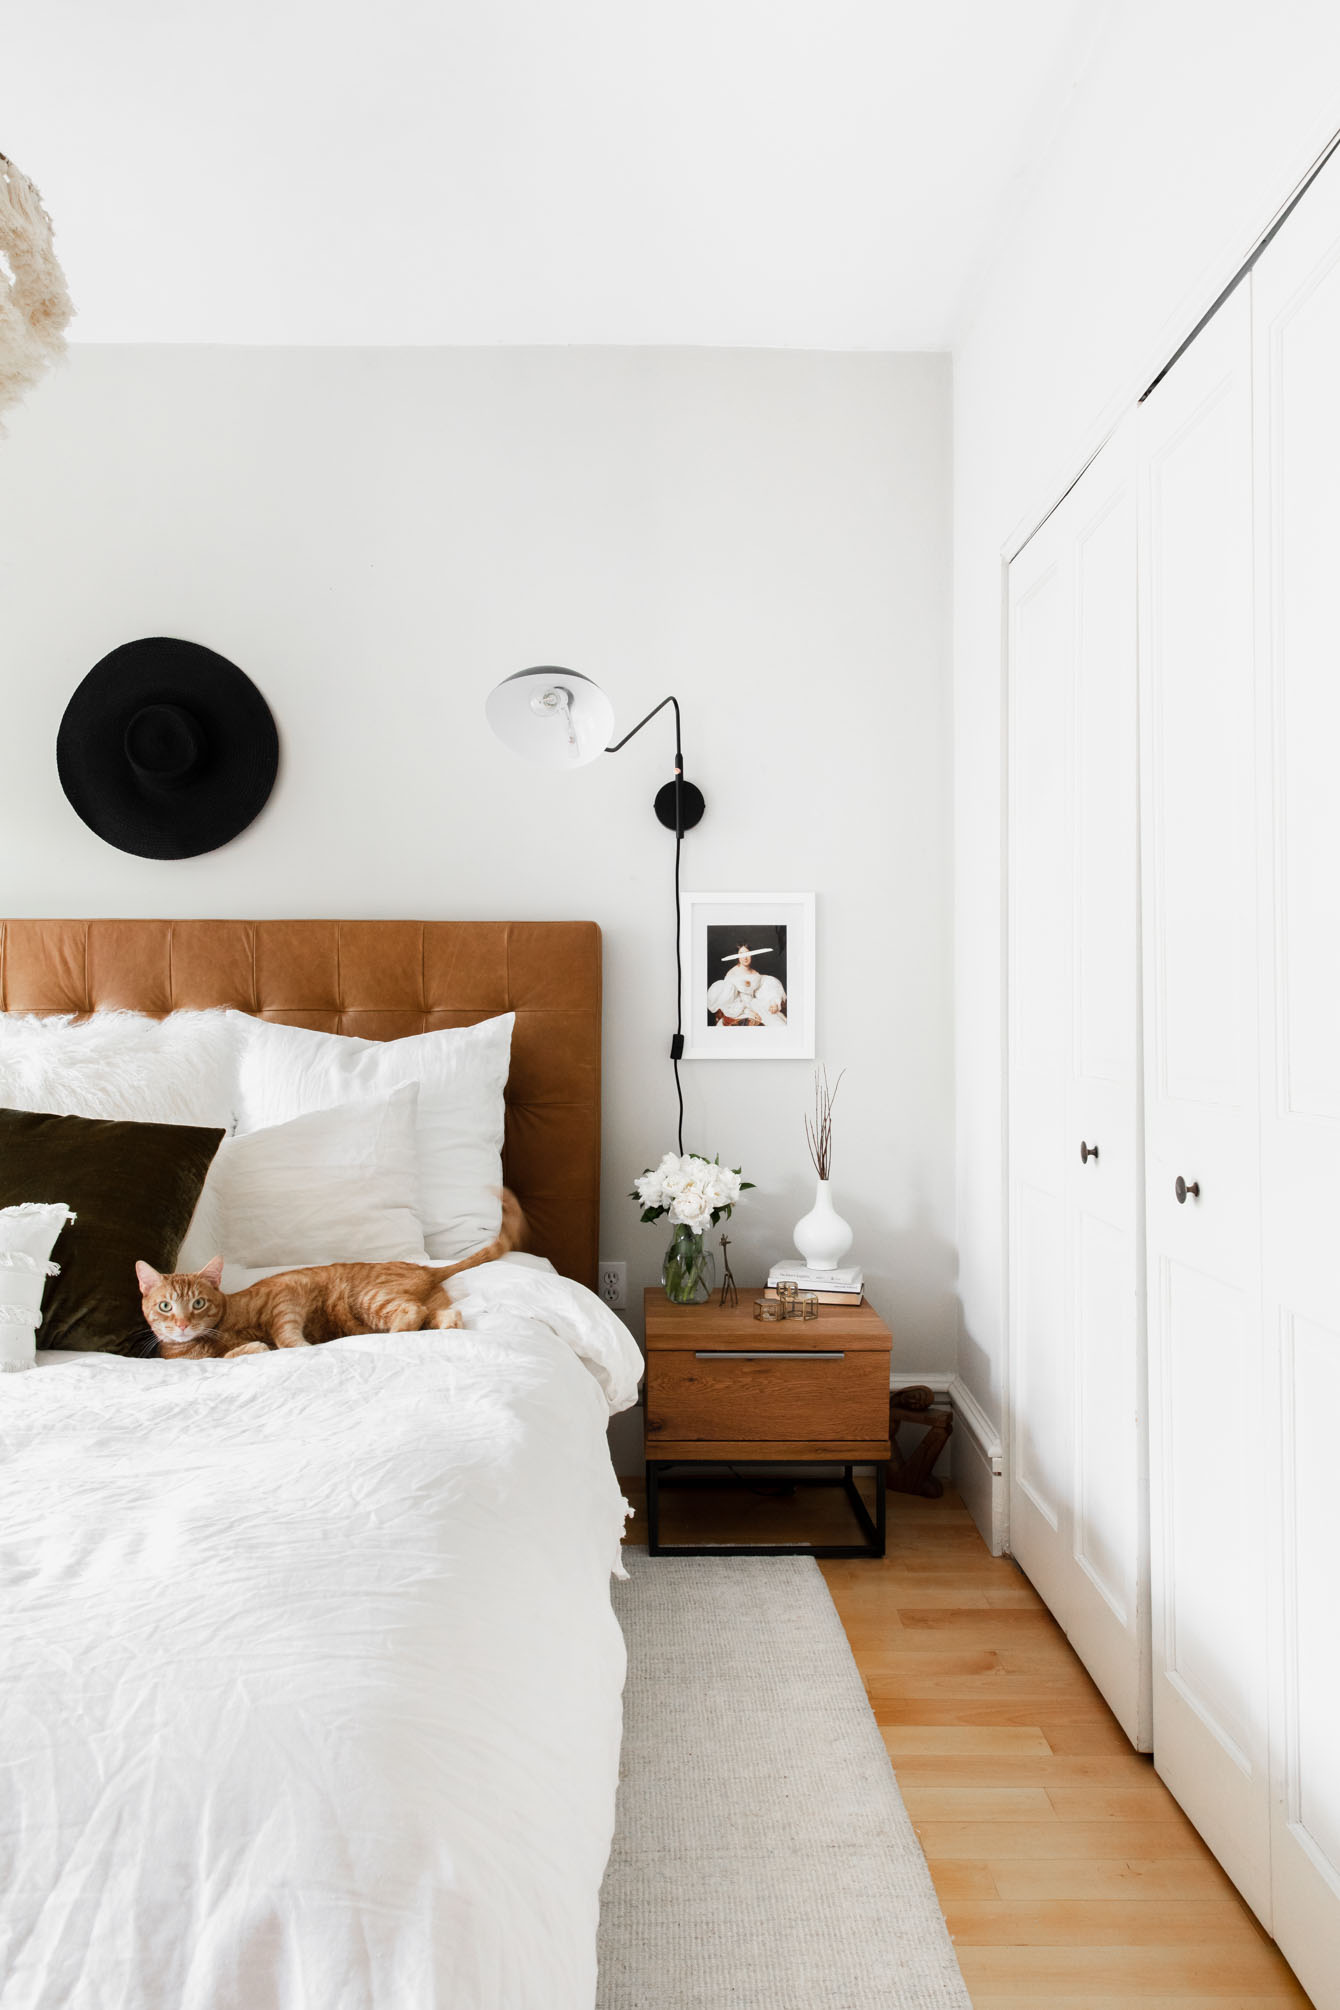 Everything about transforming your master bedroom into a modern and cozy sanctuary with some amazing pieces from Article!